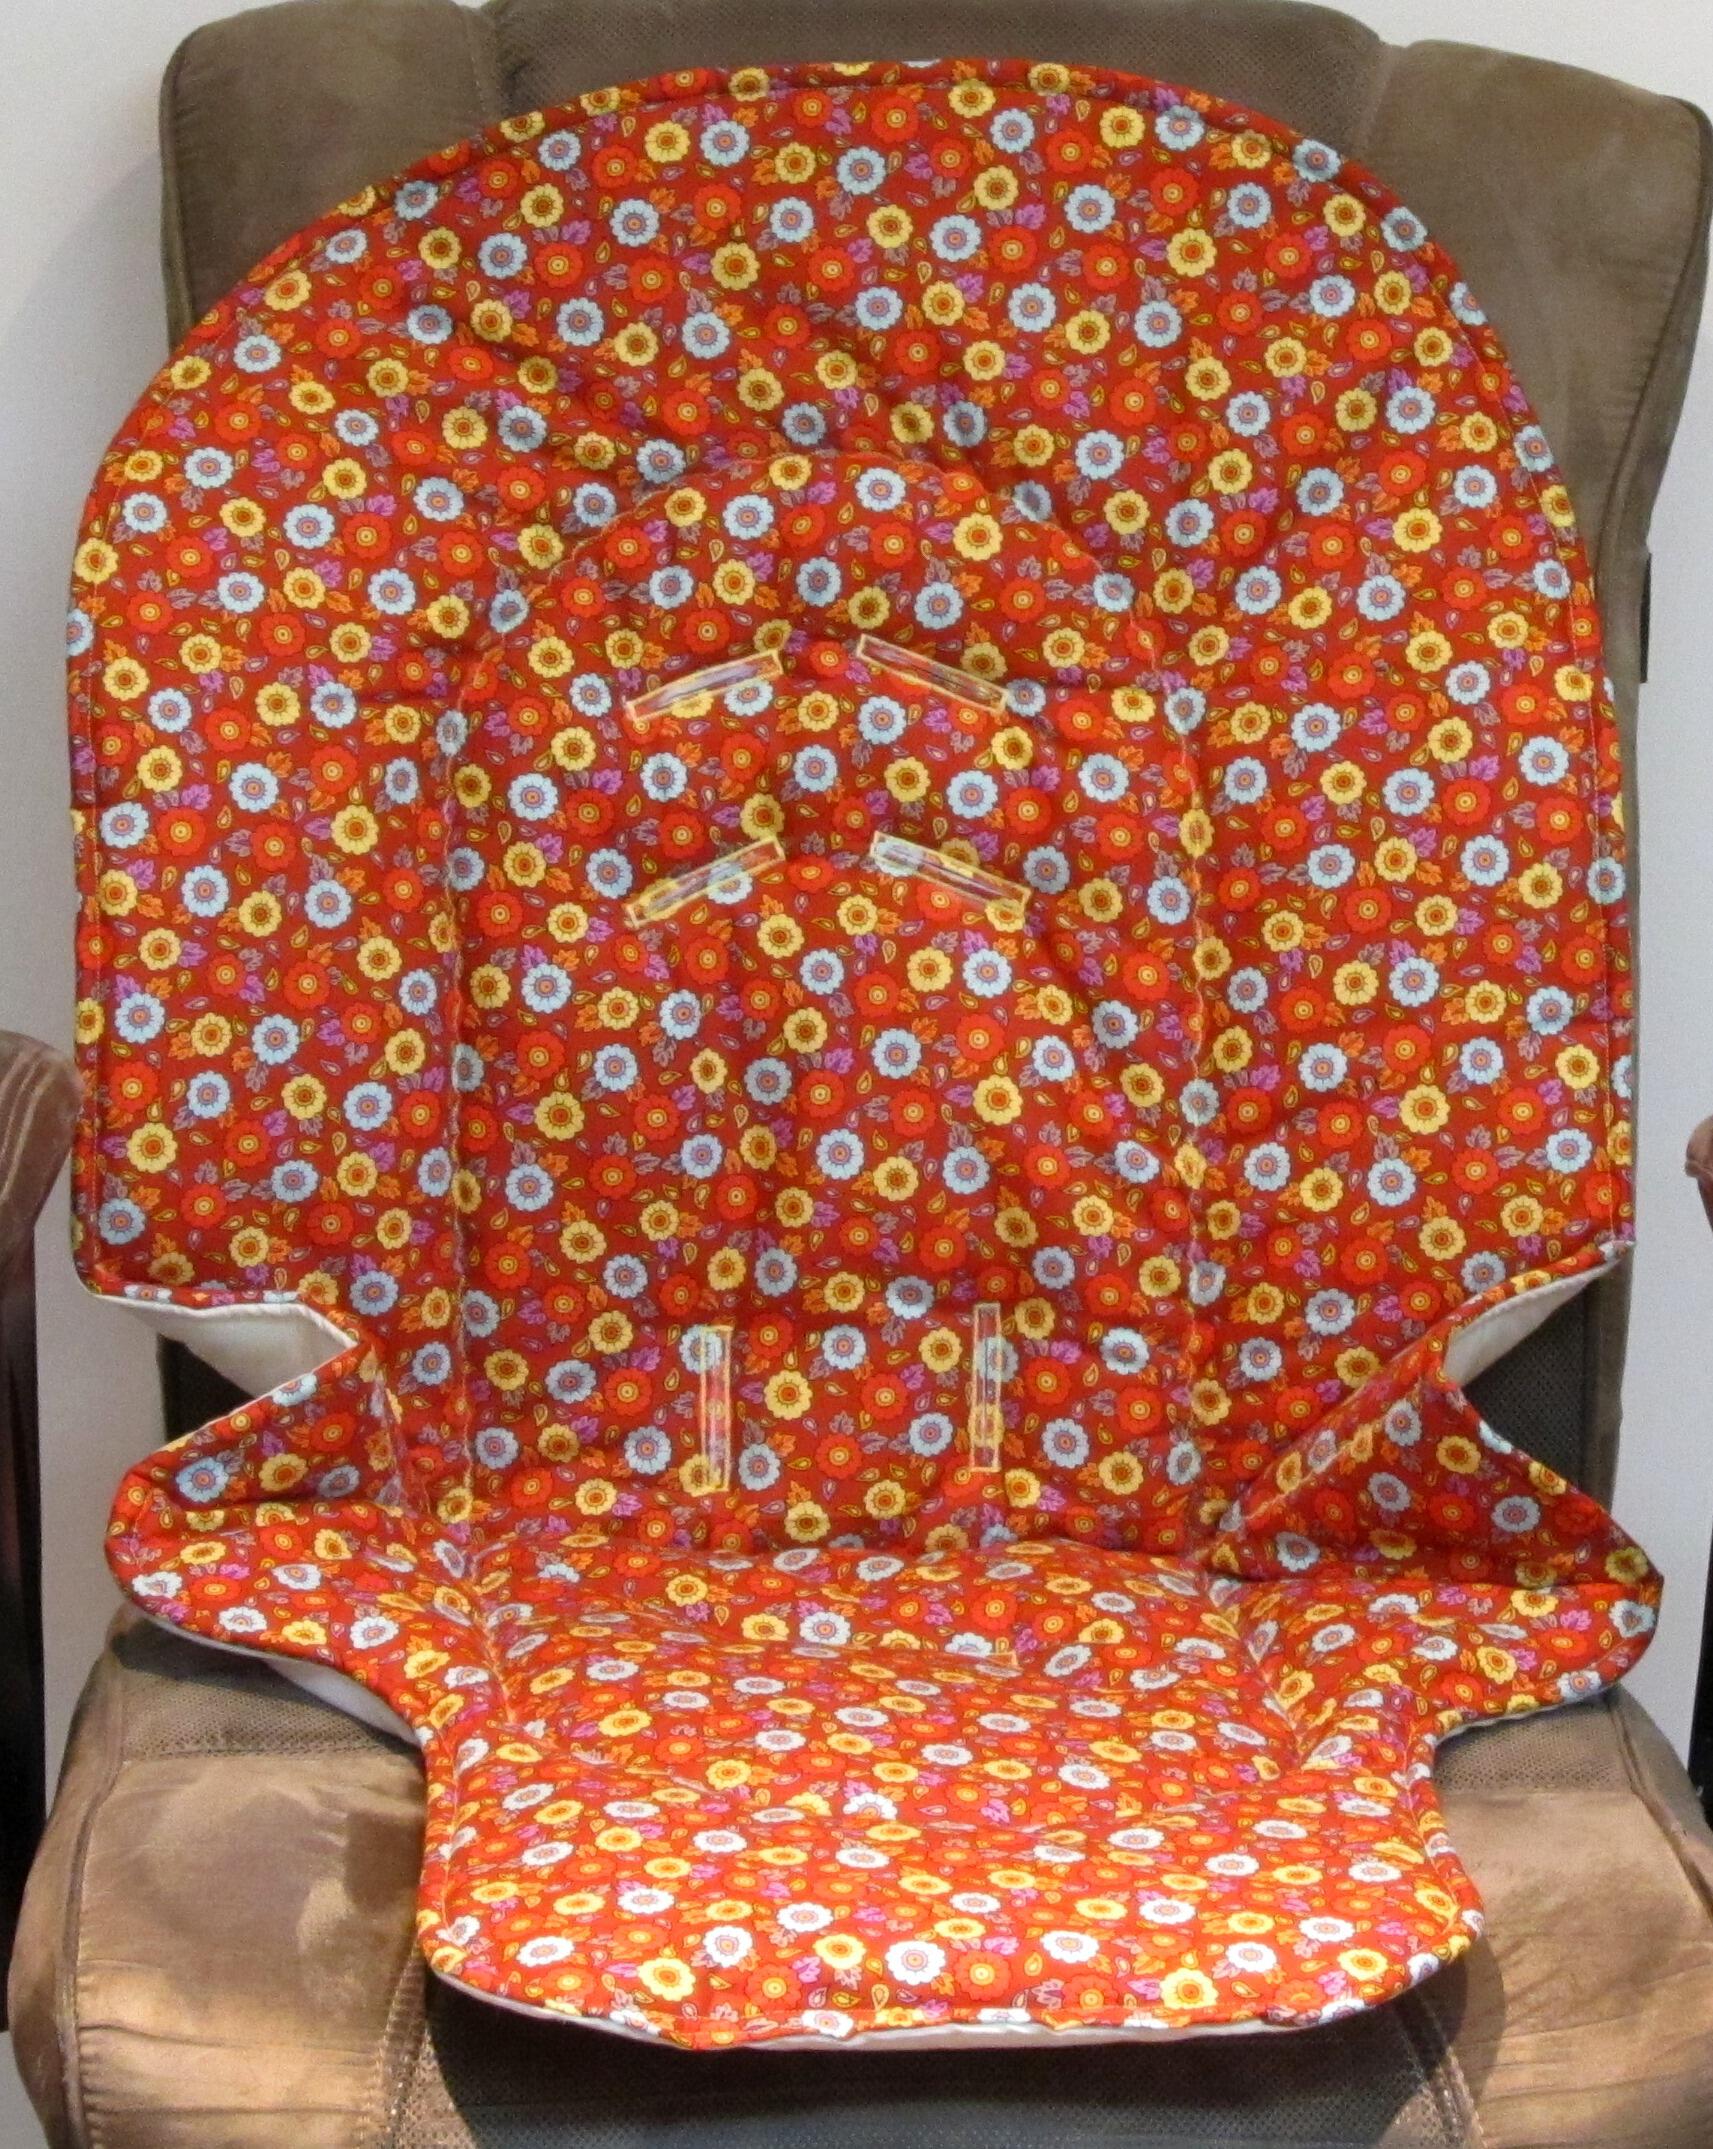 Padded Replacement Highchair cover for the older model Duodiner and Graco Blossom baby accessory chair cushion, hand made